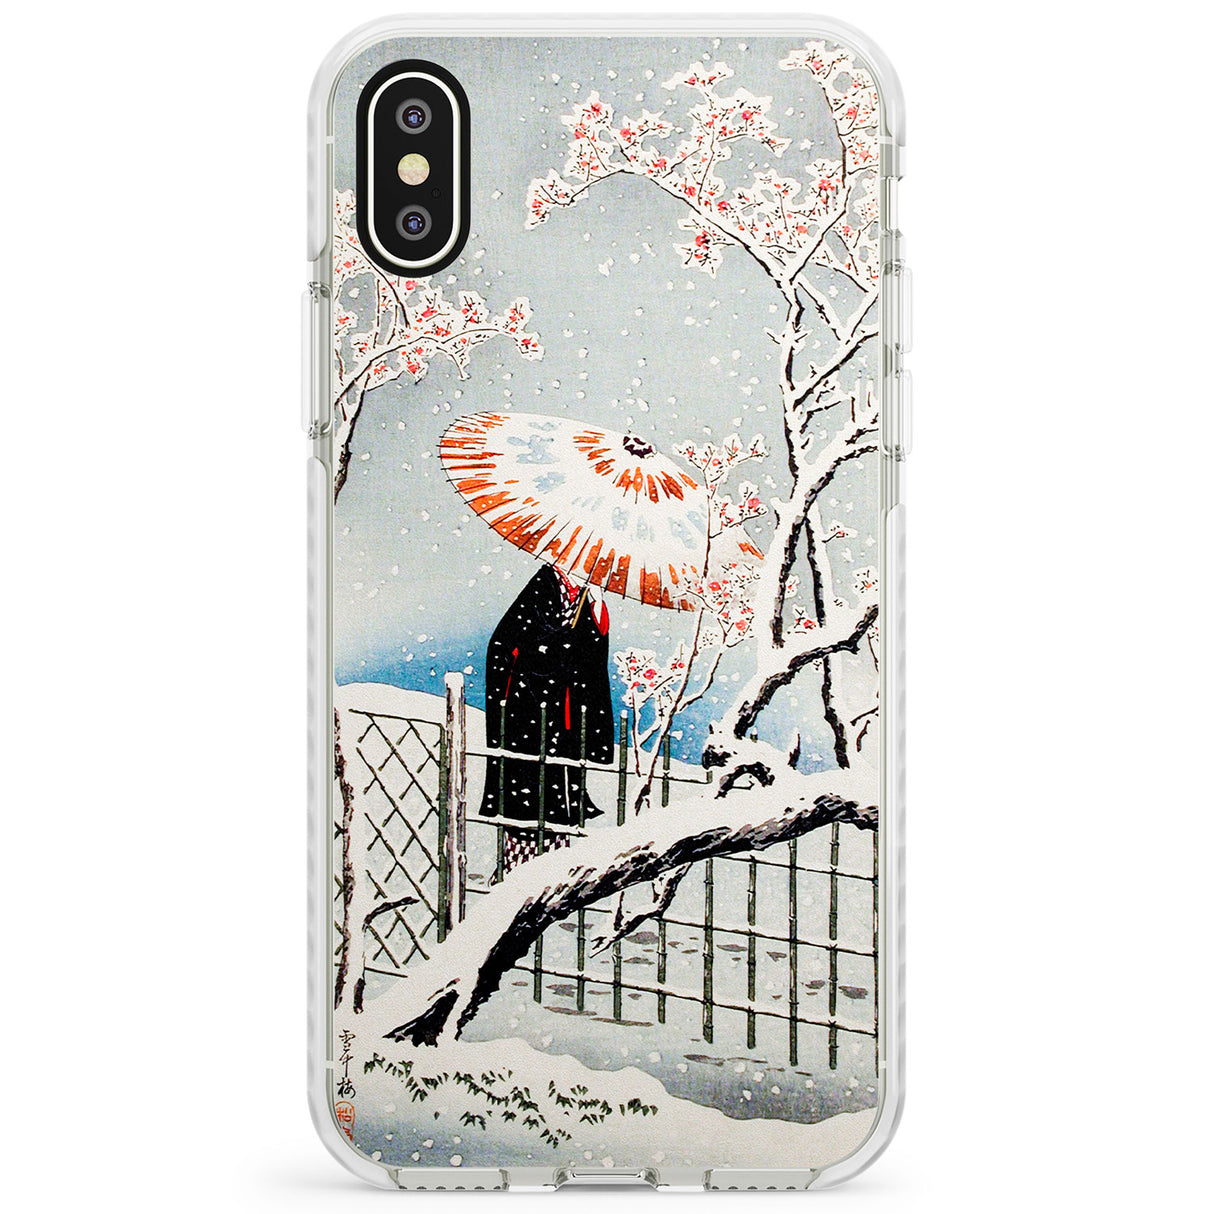 Plum Tree in Snow by Hiroaki Takahashi Impact Phone Case for iPhone X XS Max XR